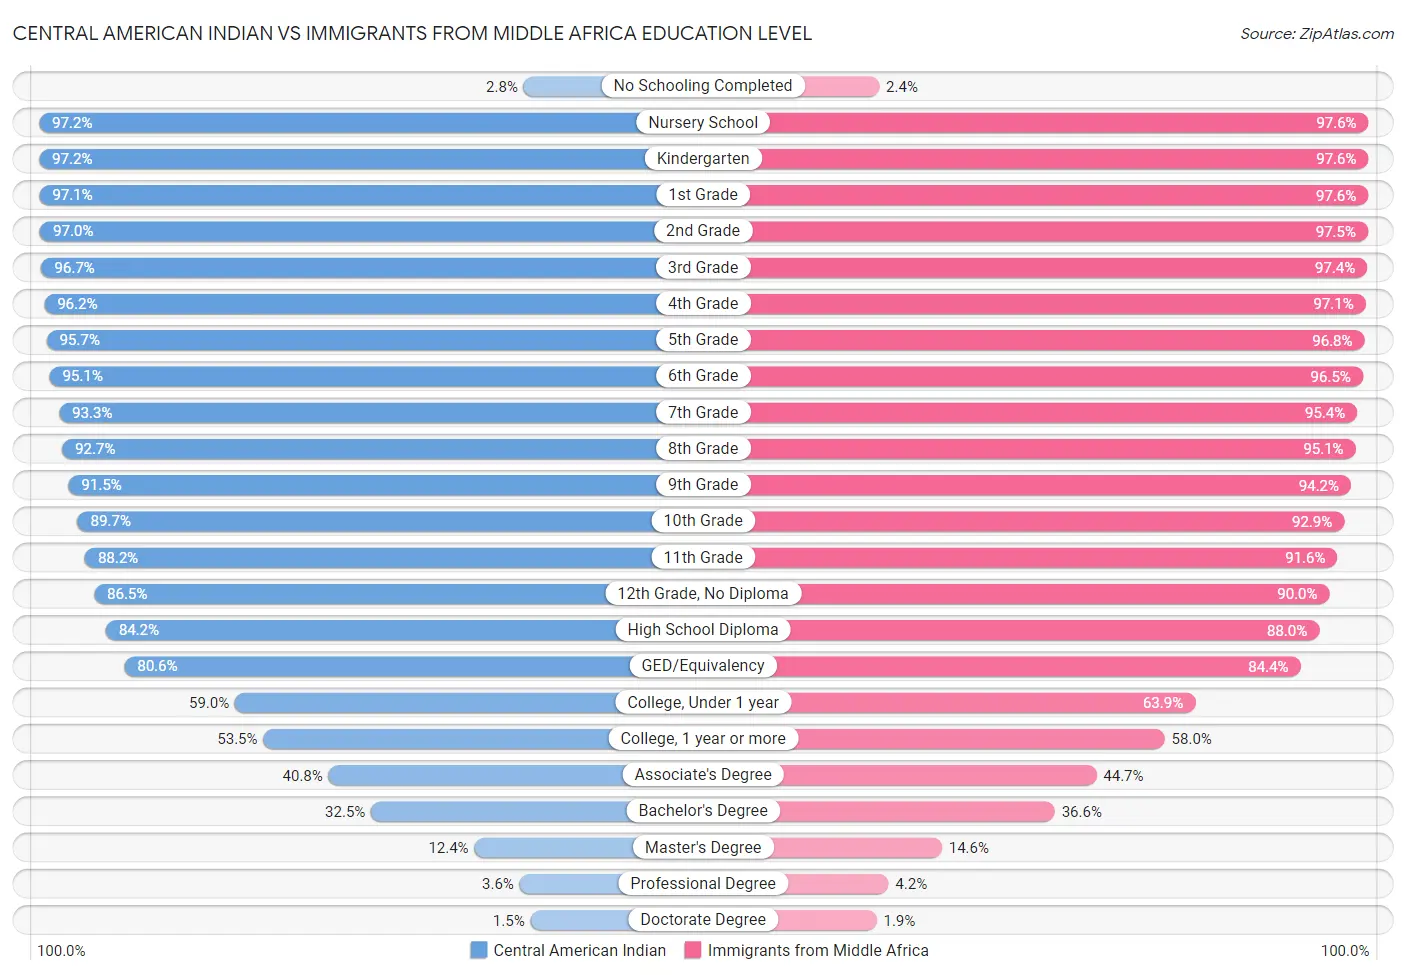 Central American Indian vs Immigrants from Middle Africa Education Level